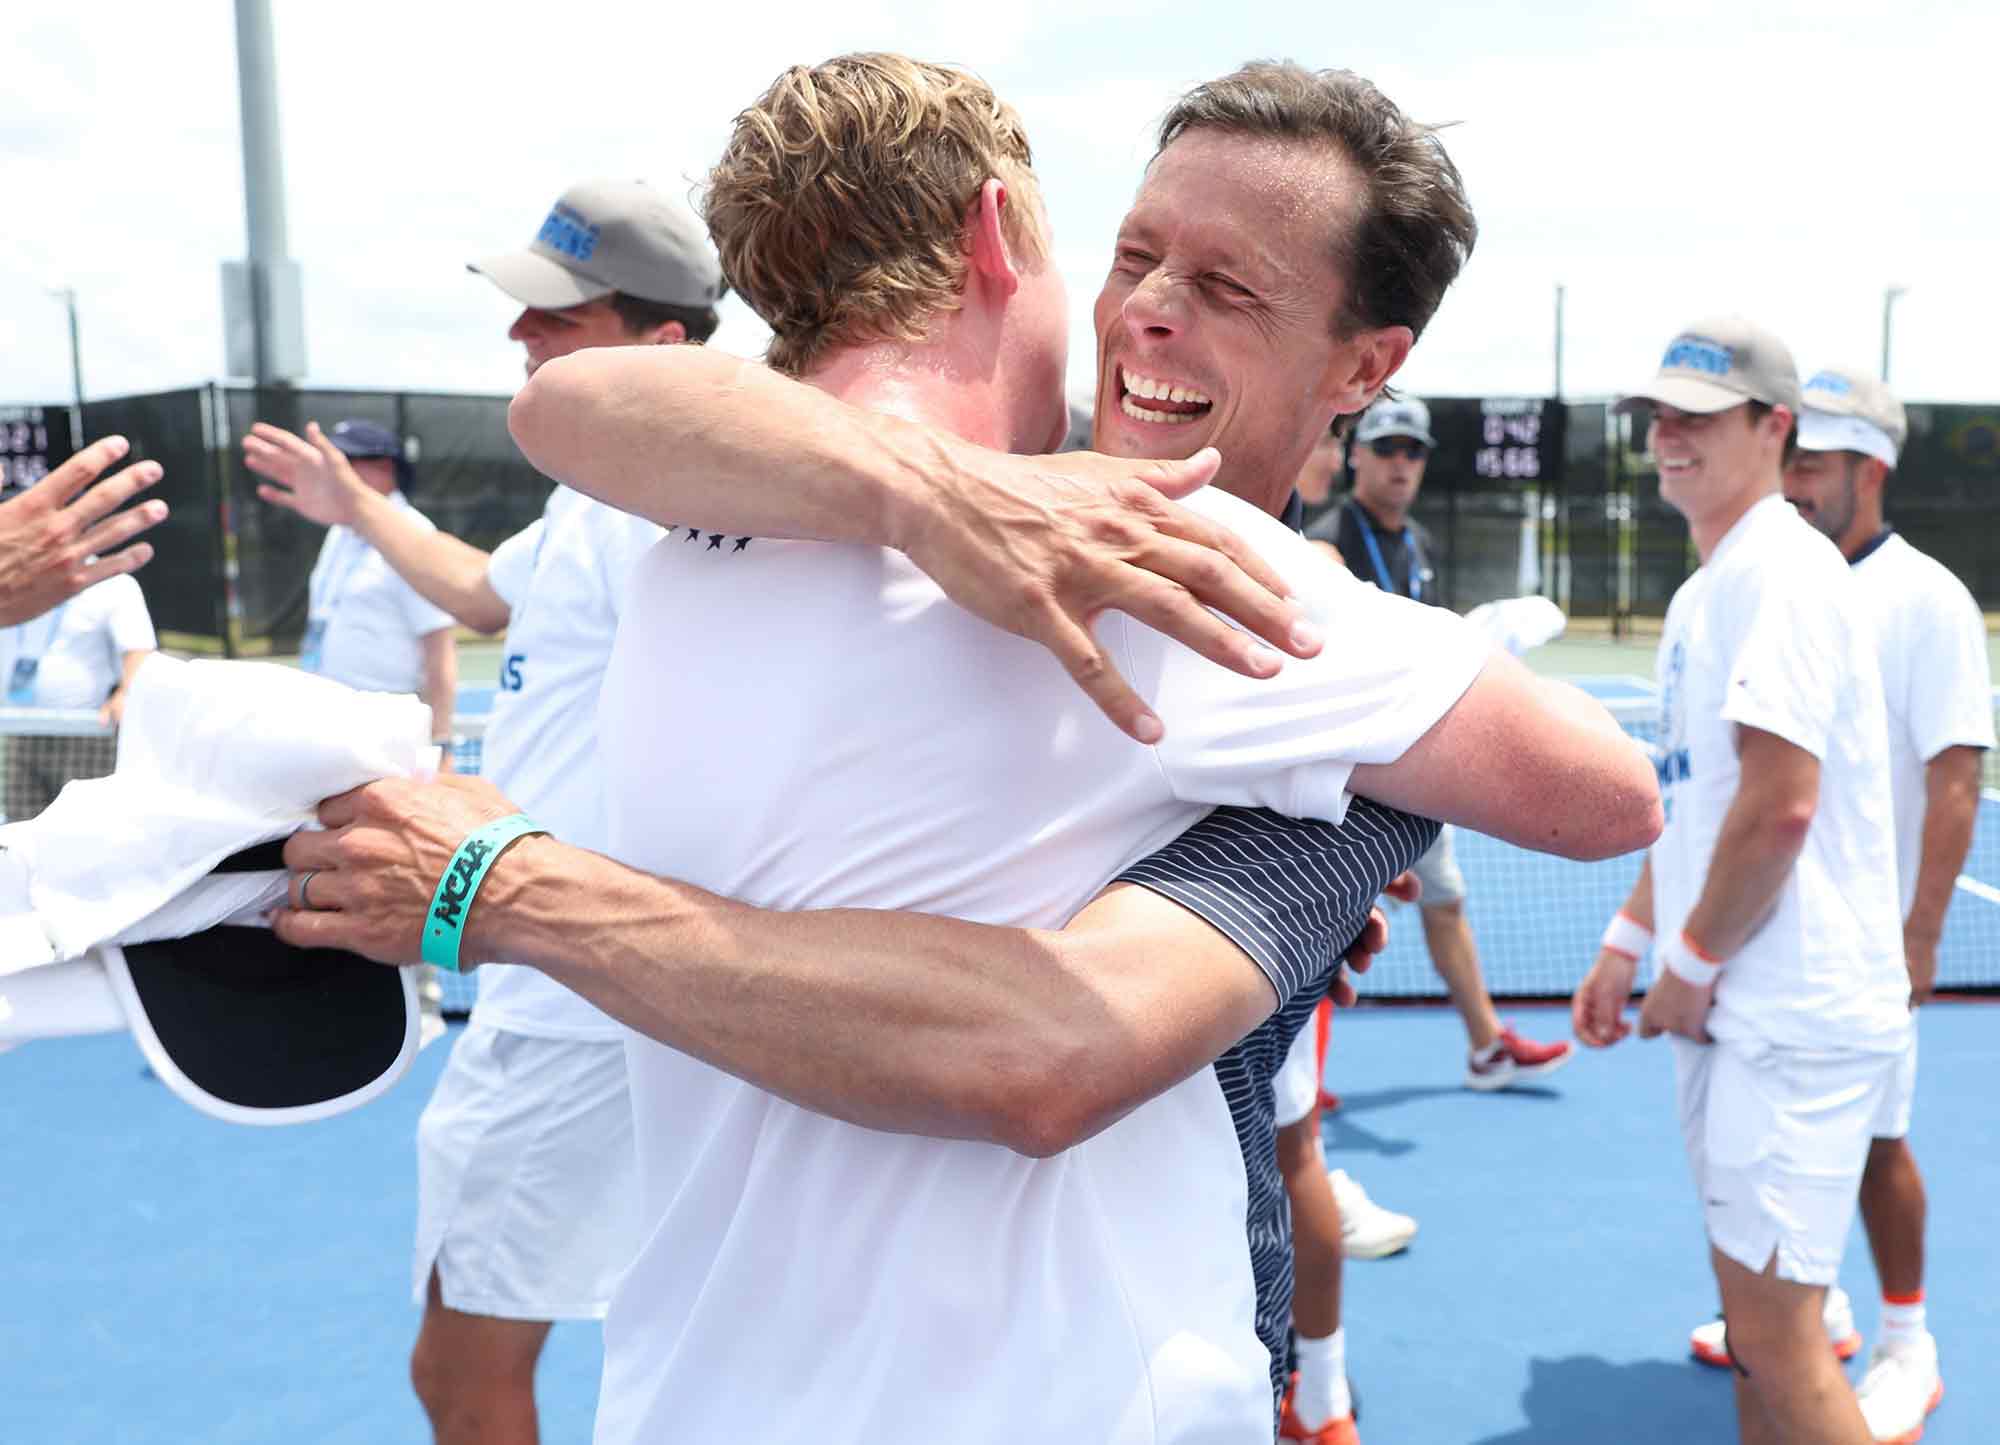 Head coach embraces tennis player in celebration